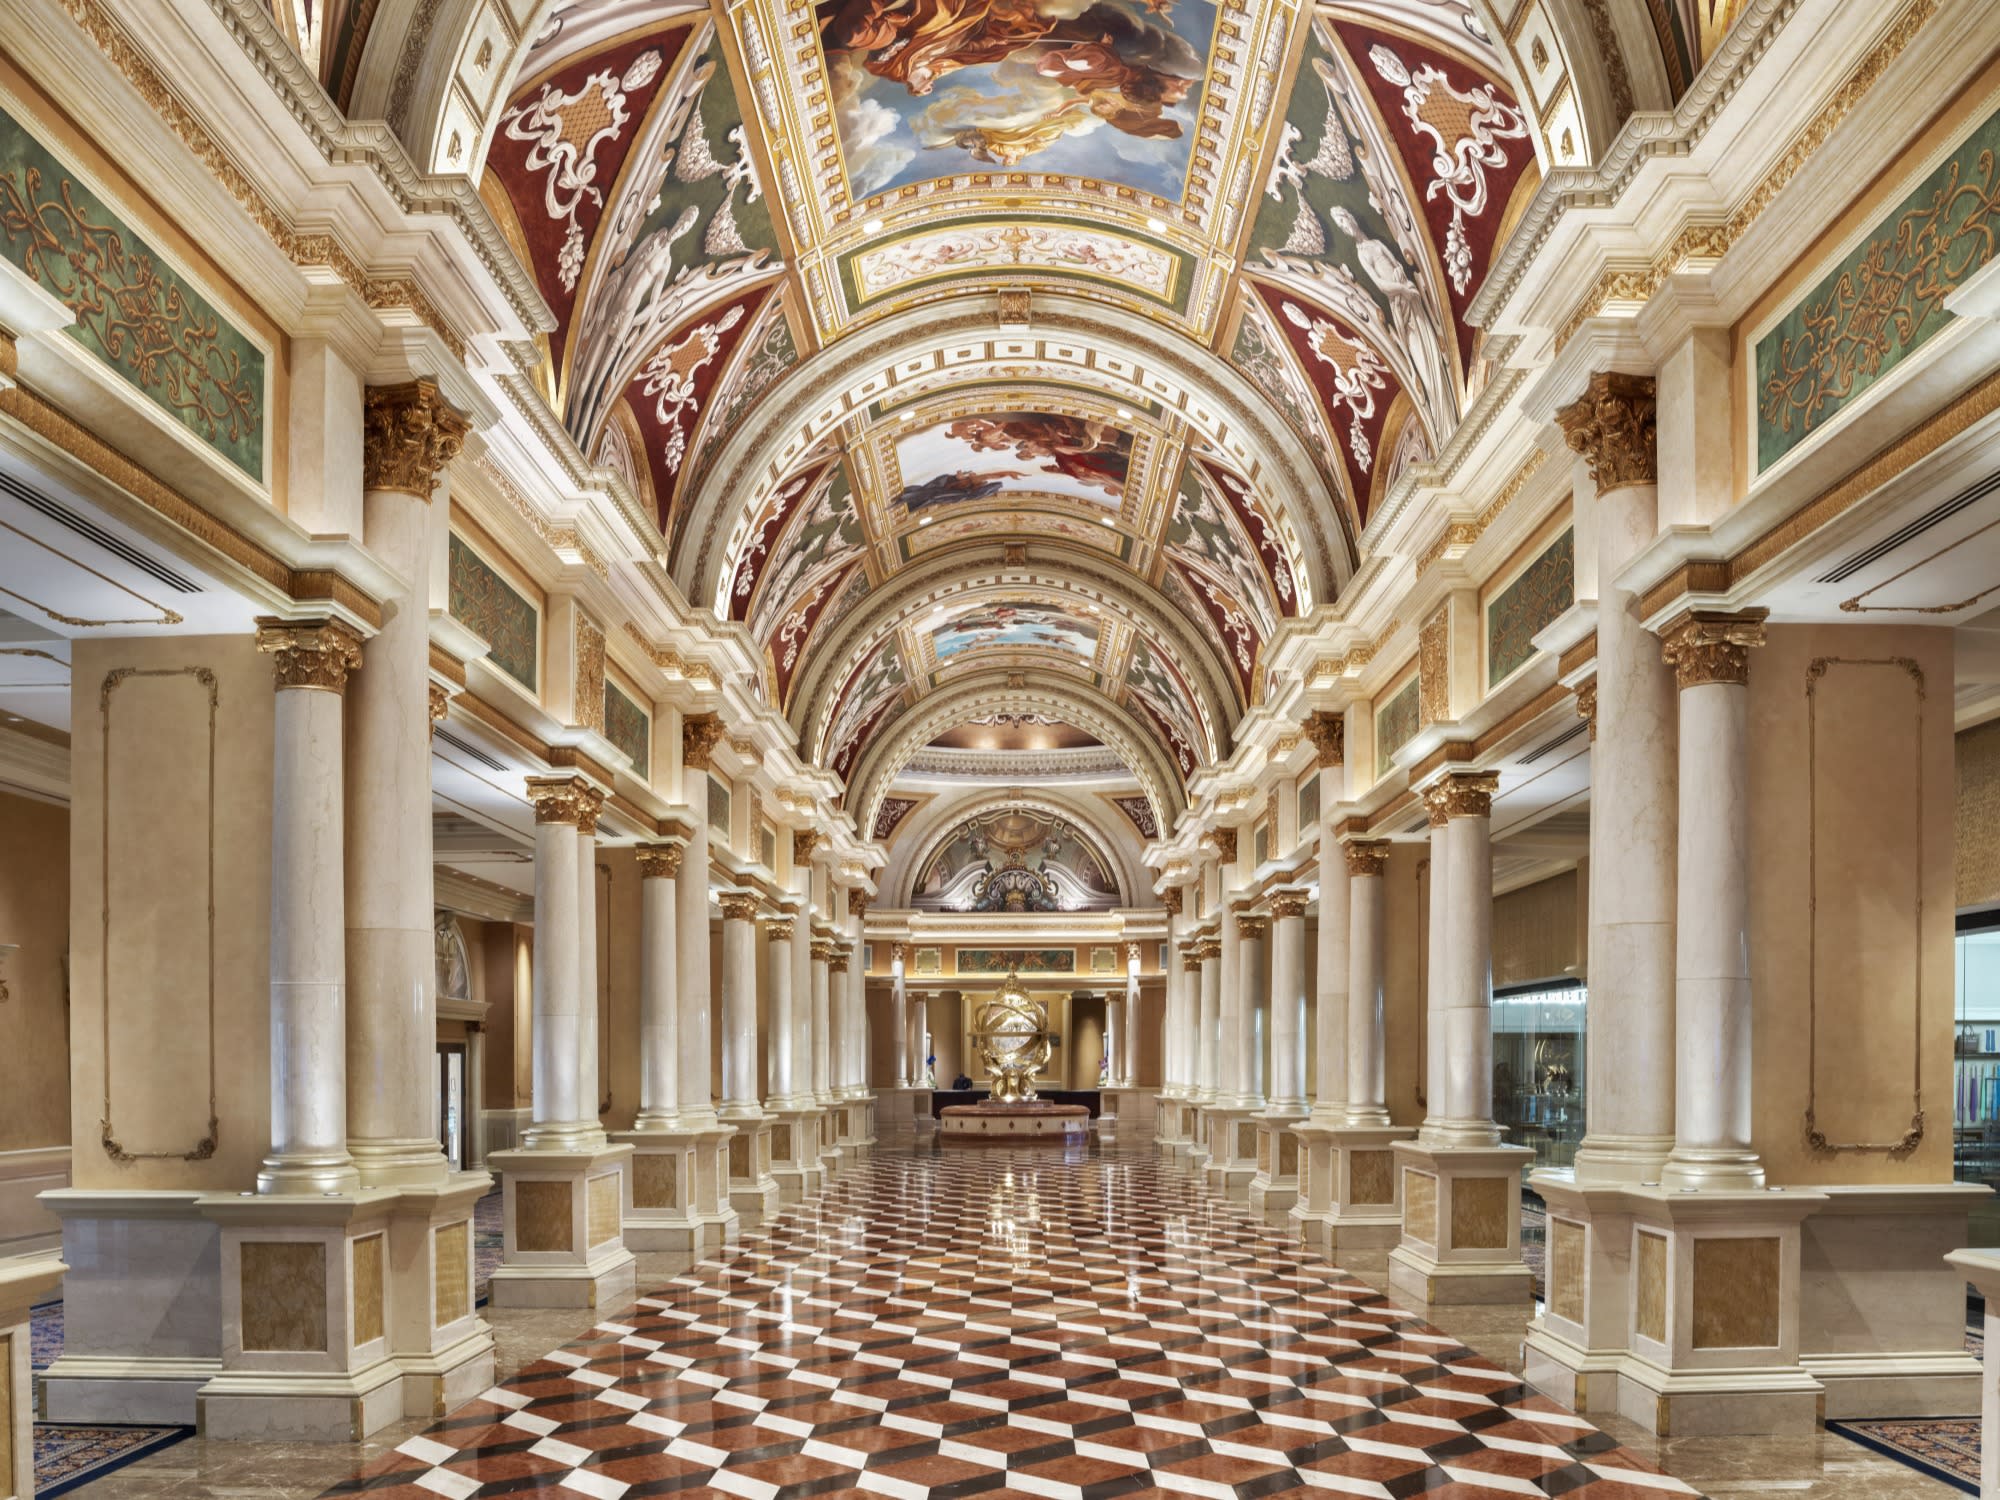 whats-trending-our-advisors-top-booked-hotels-in-the-us-in-2022-venetian